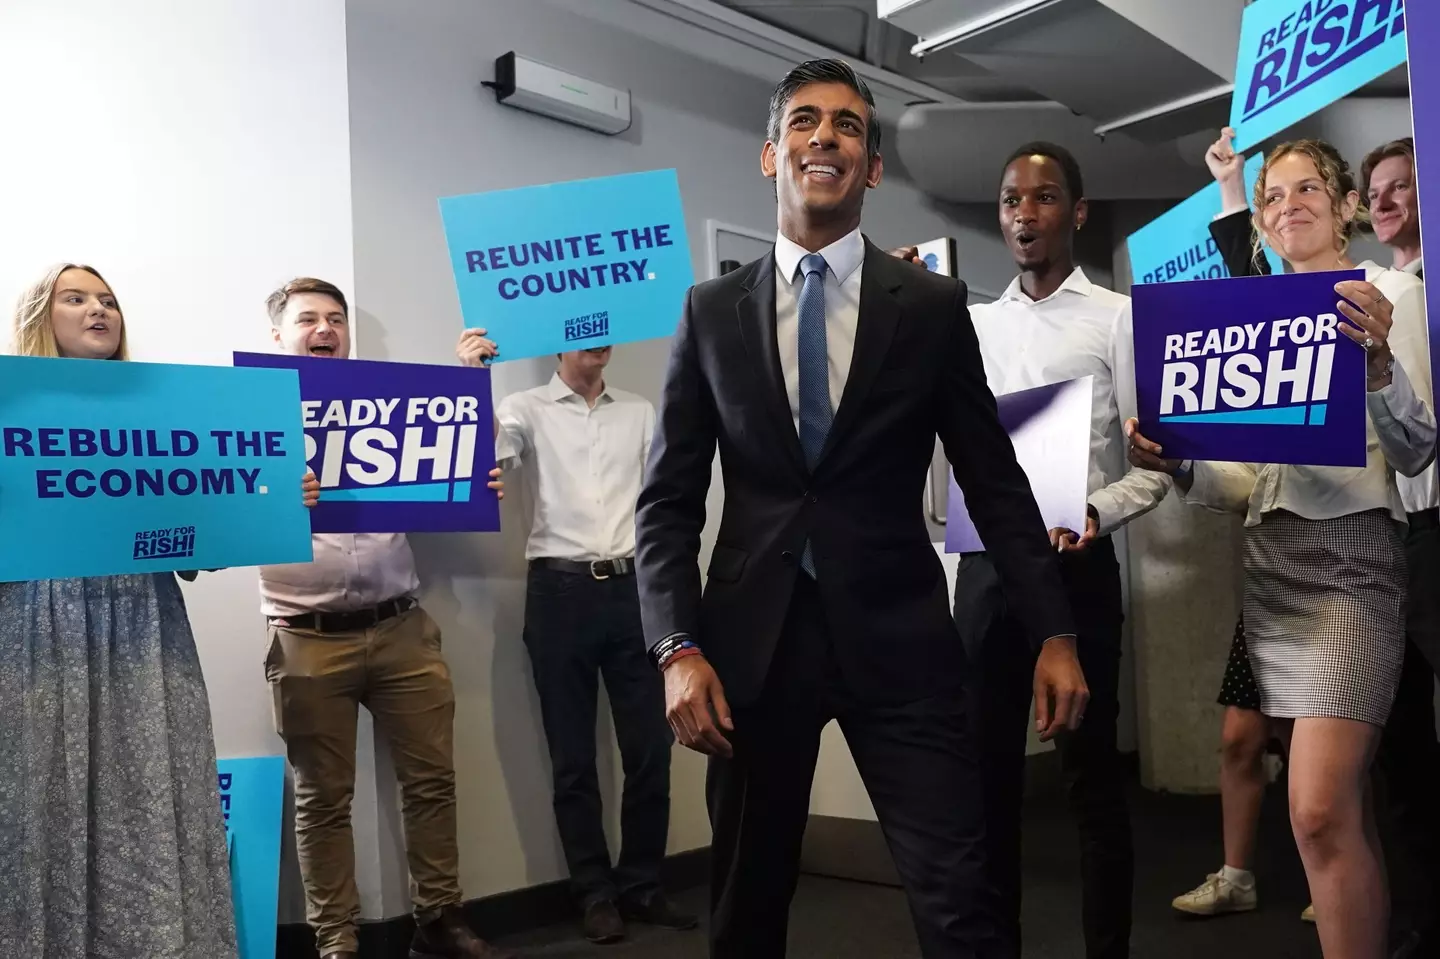 It turns out that Rishi Sunak is a bit shorter than people realised.